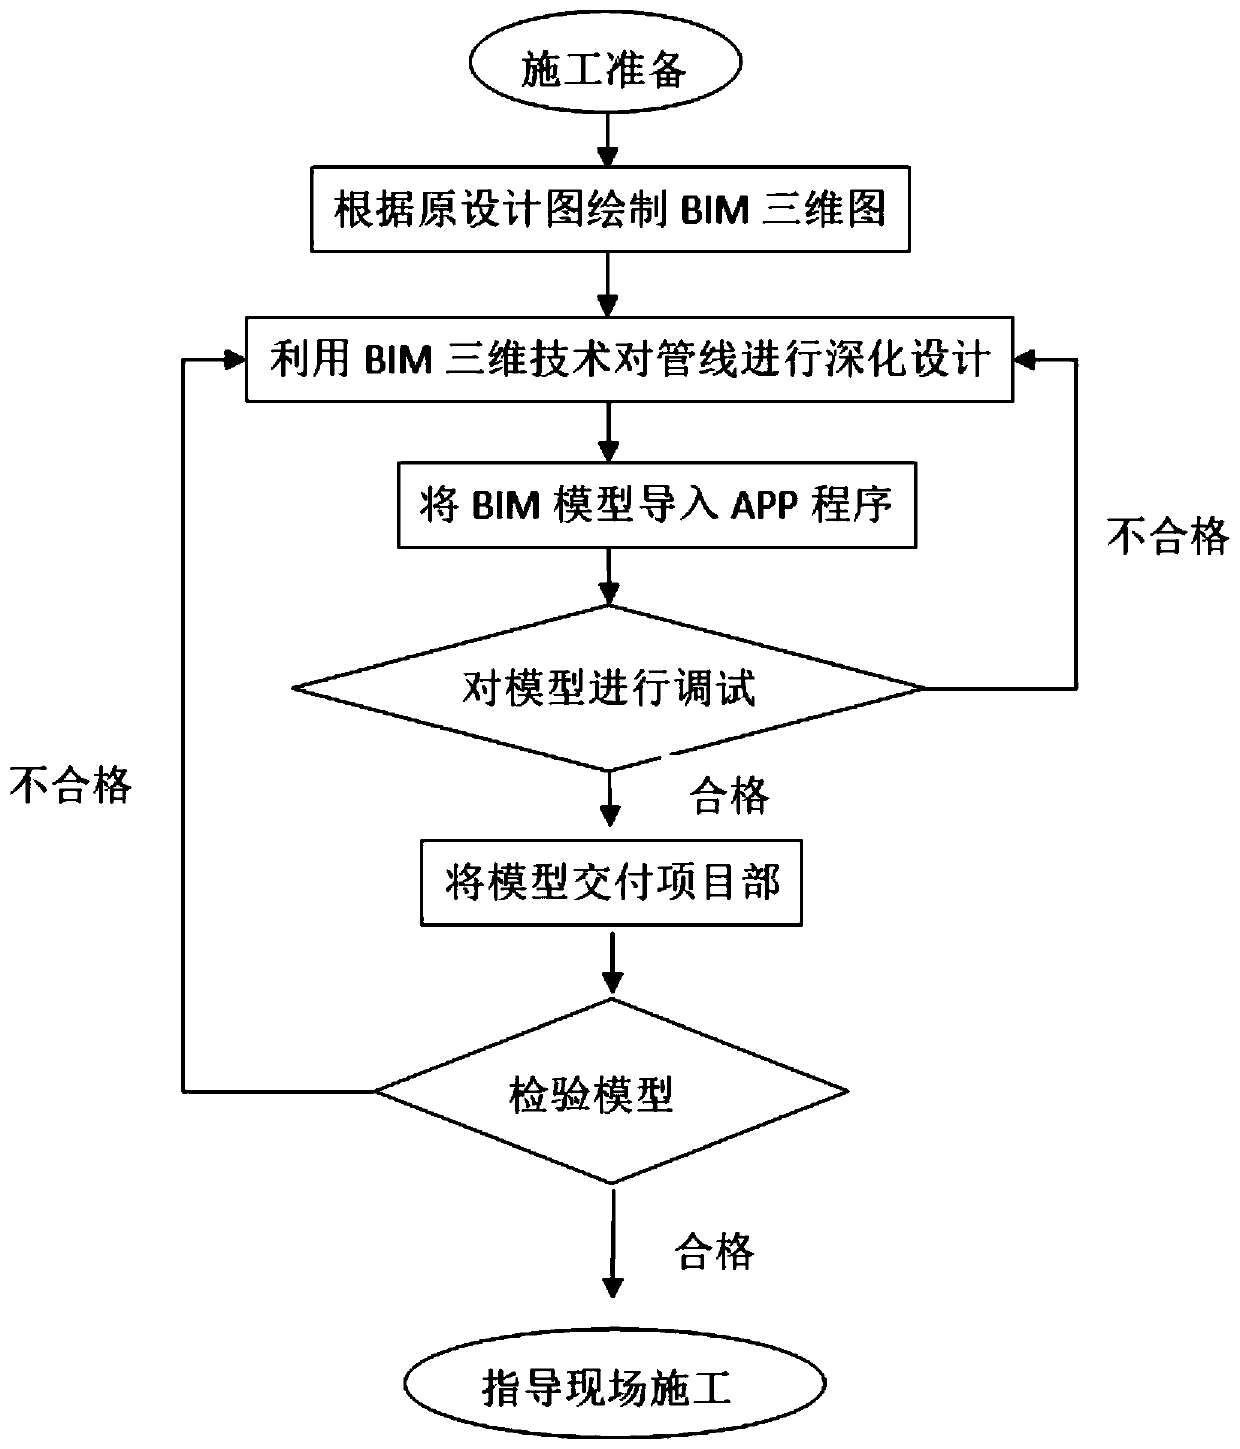 Method for determining on-site coordinate position based on mobile phone BIM construction drawing AR